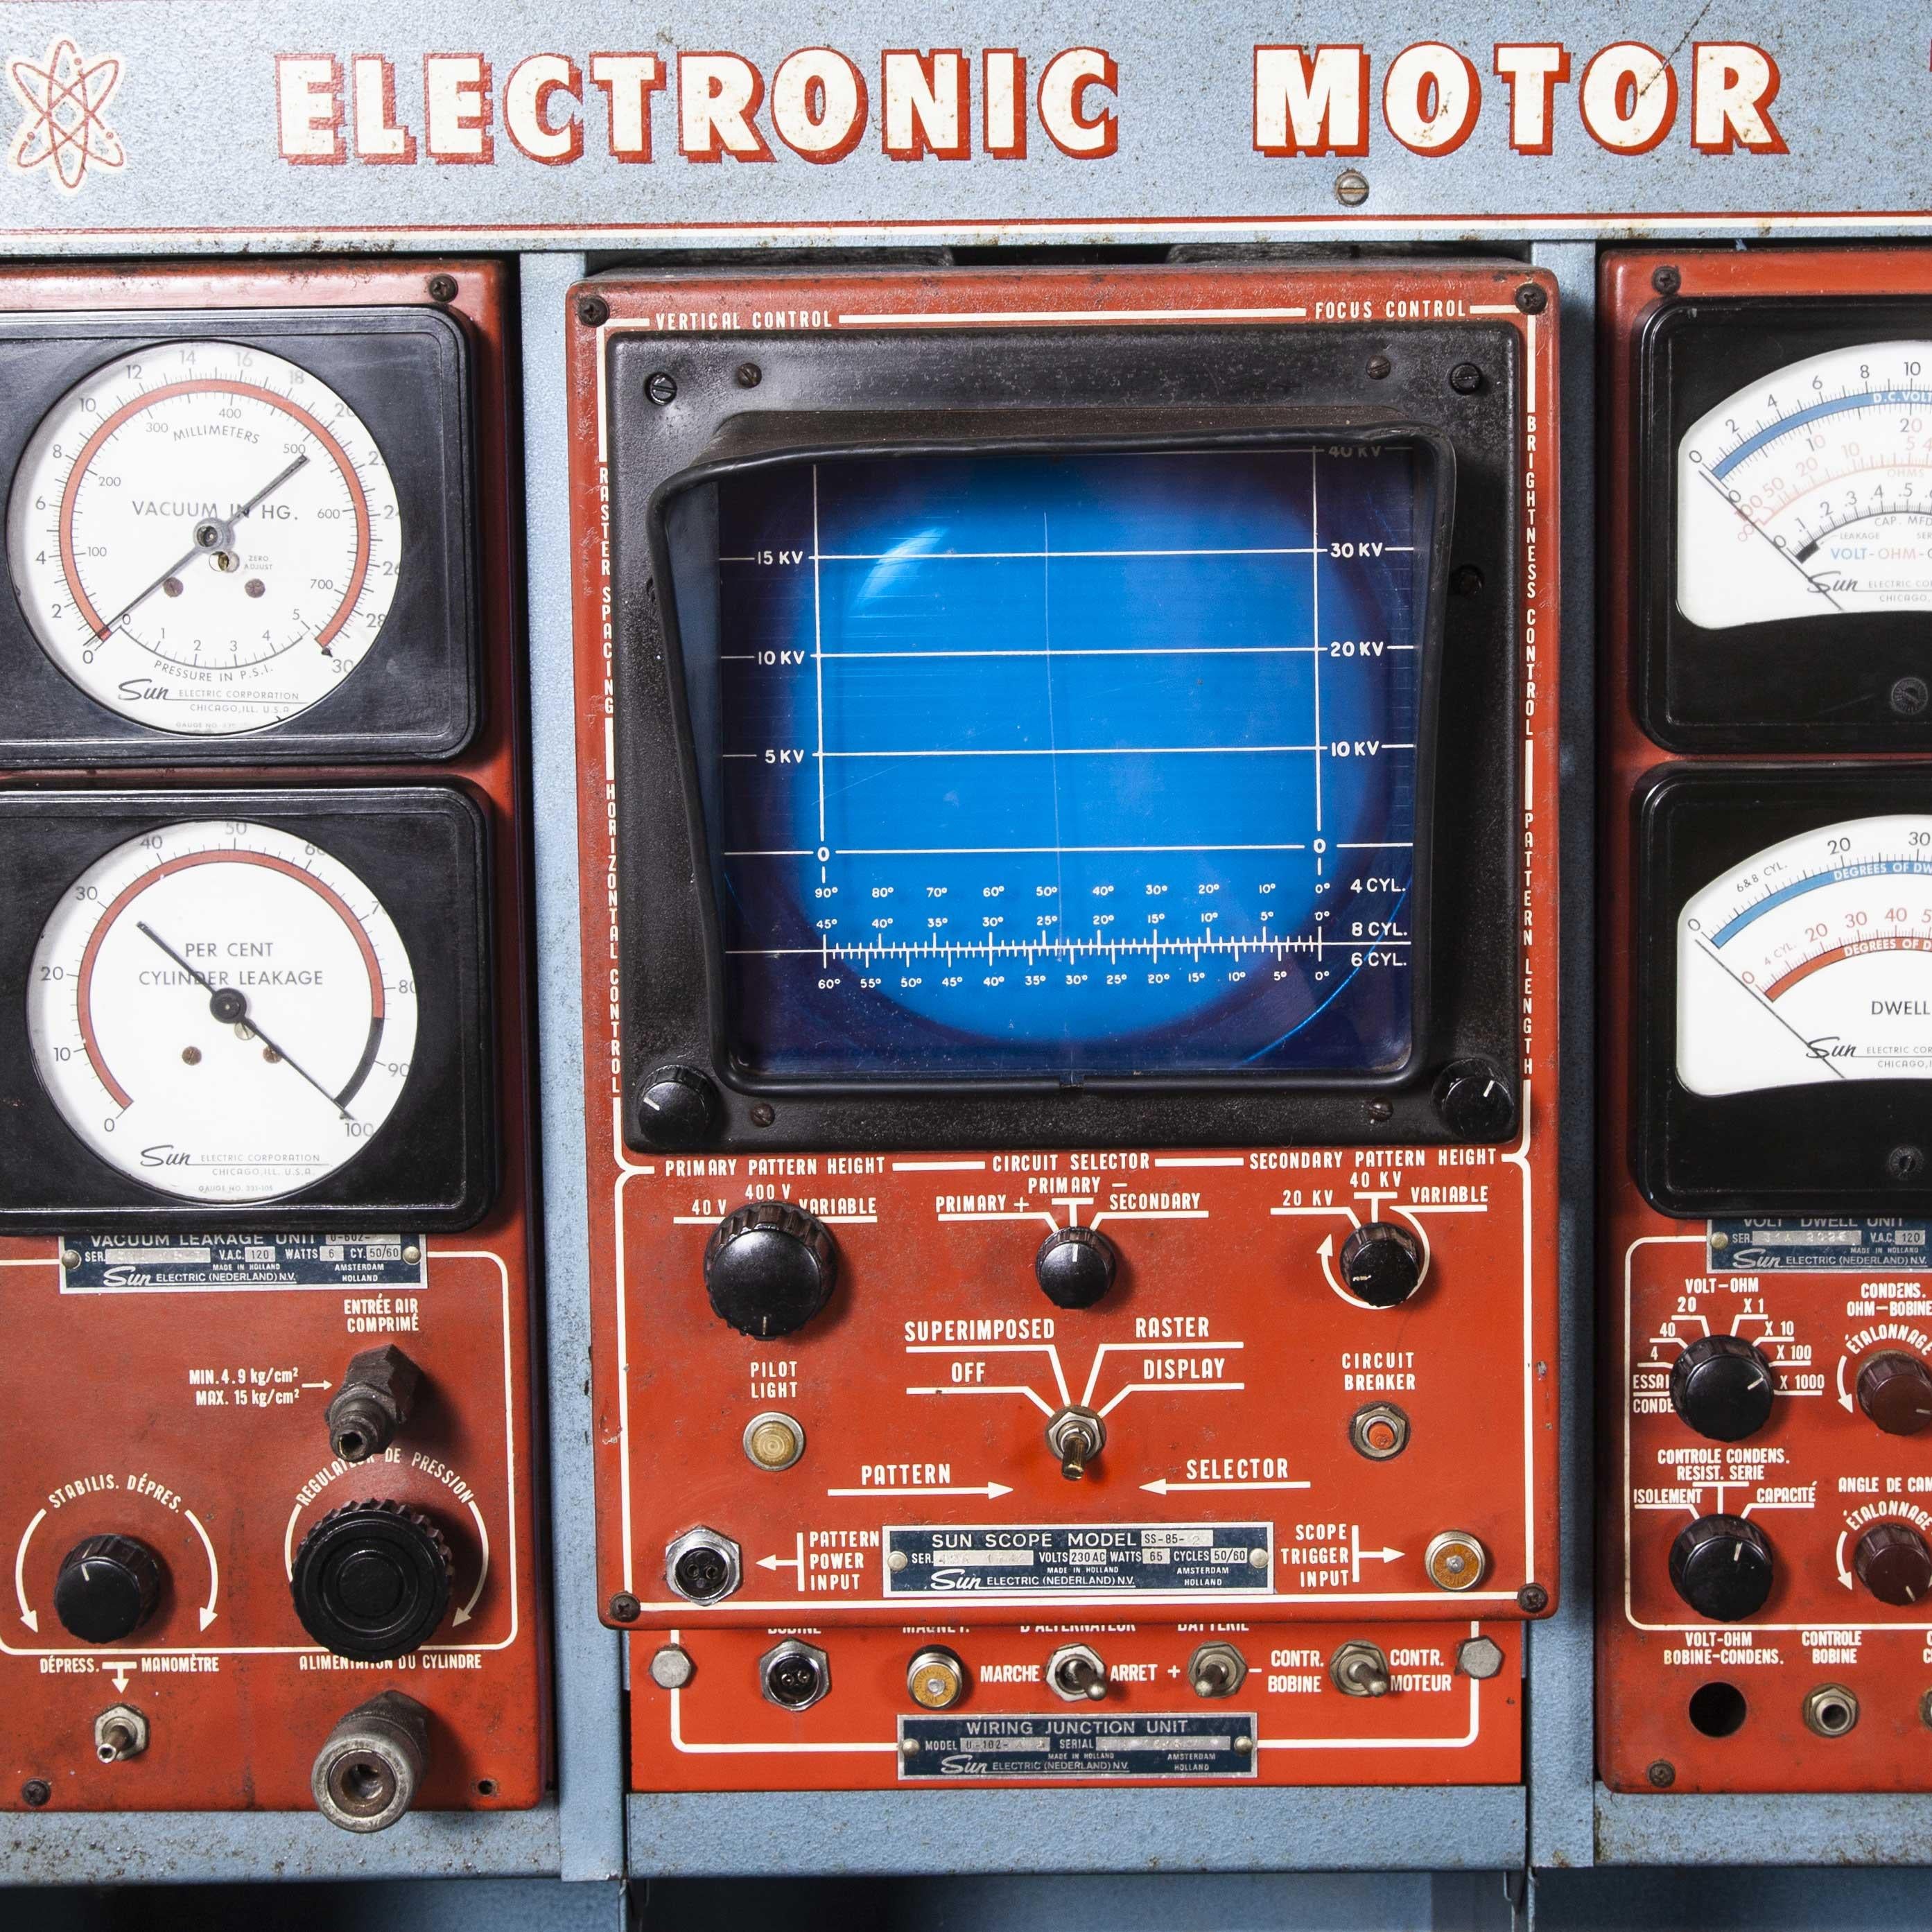 1950s sun engine diagnostic testing machine – Mechanic’s cabinet. We saw this in a barn in France and couldn’t resist it as the graphics and colors just take us back to that heyday of the combustion engine. We are selling the machine as a decorative